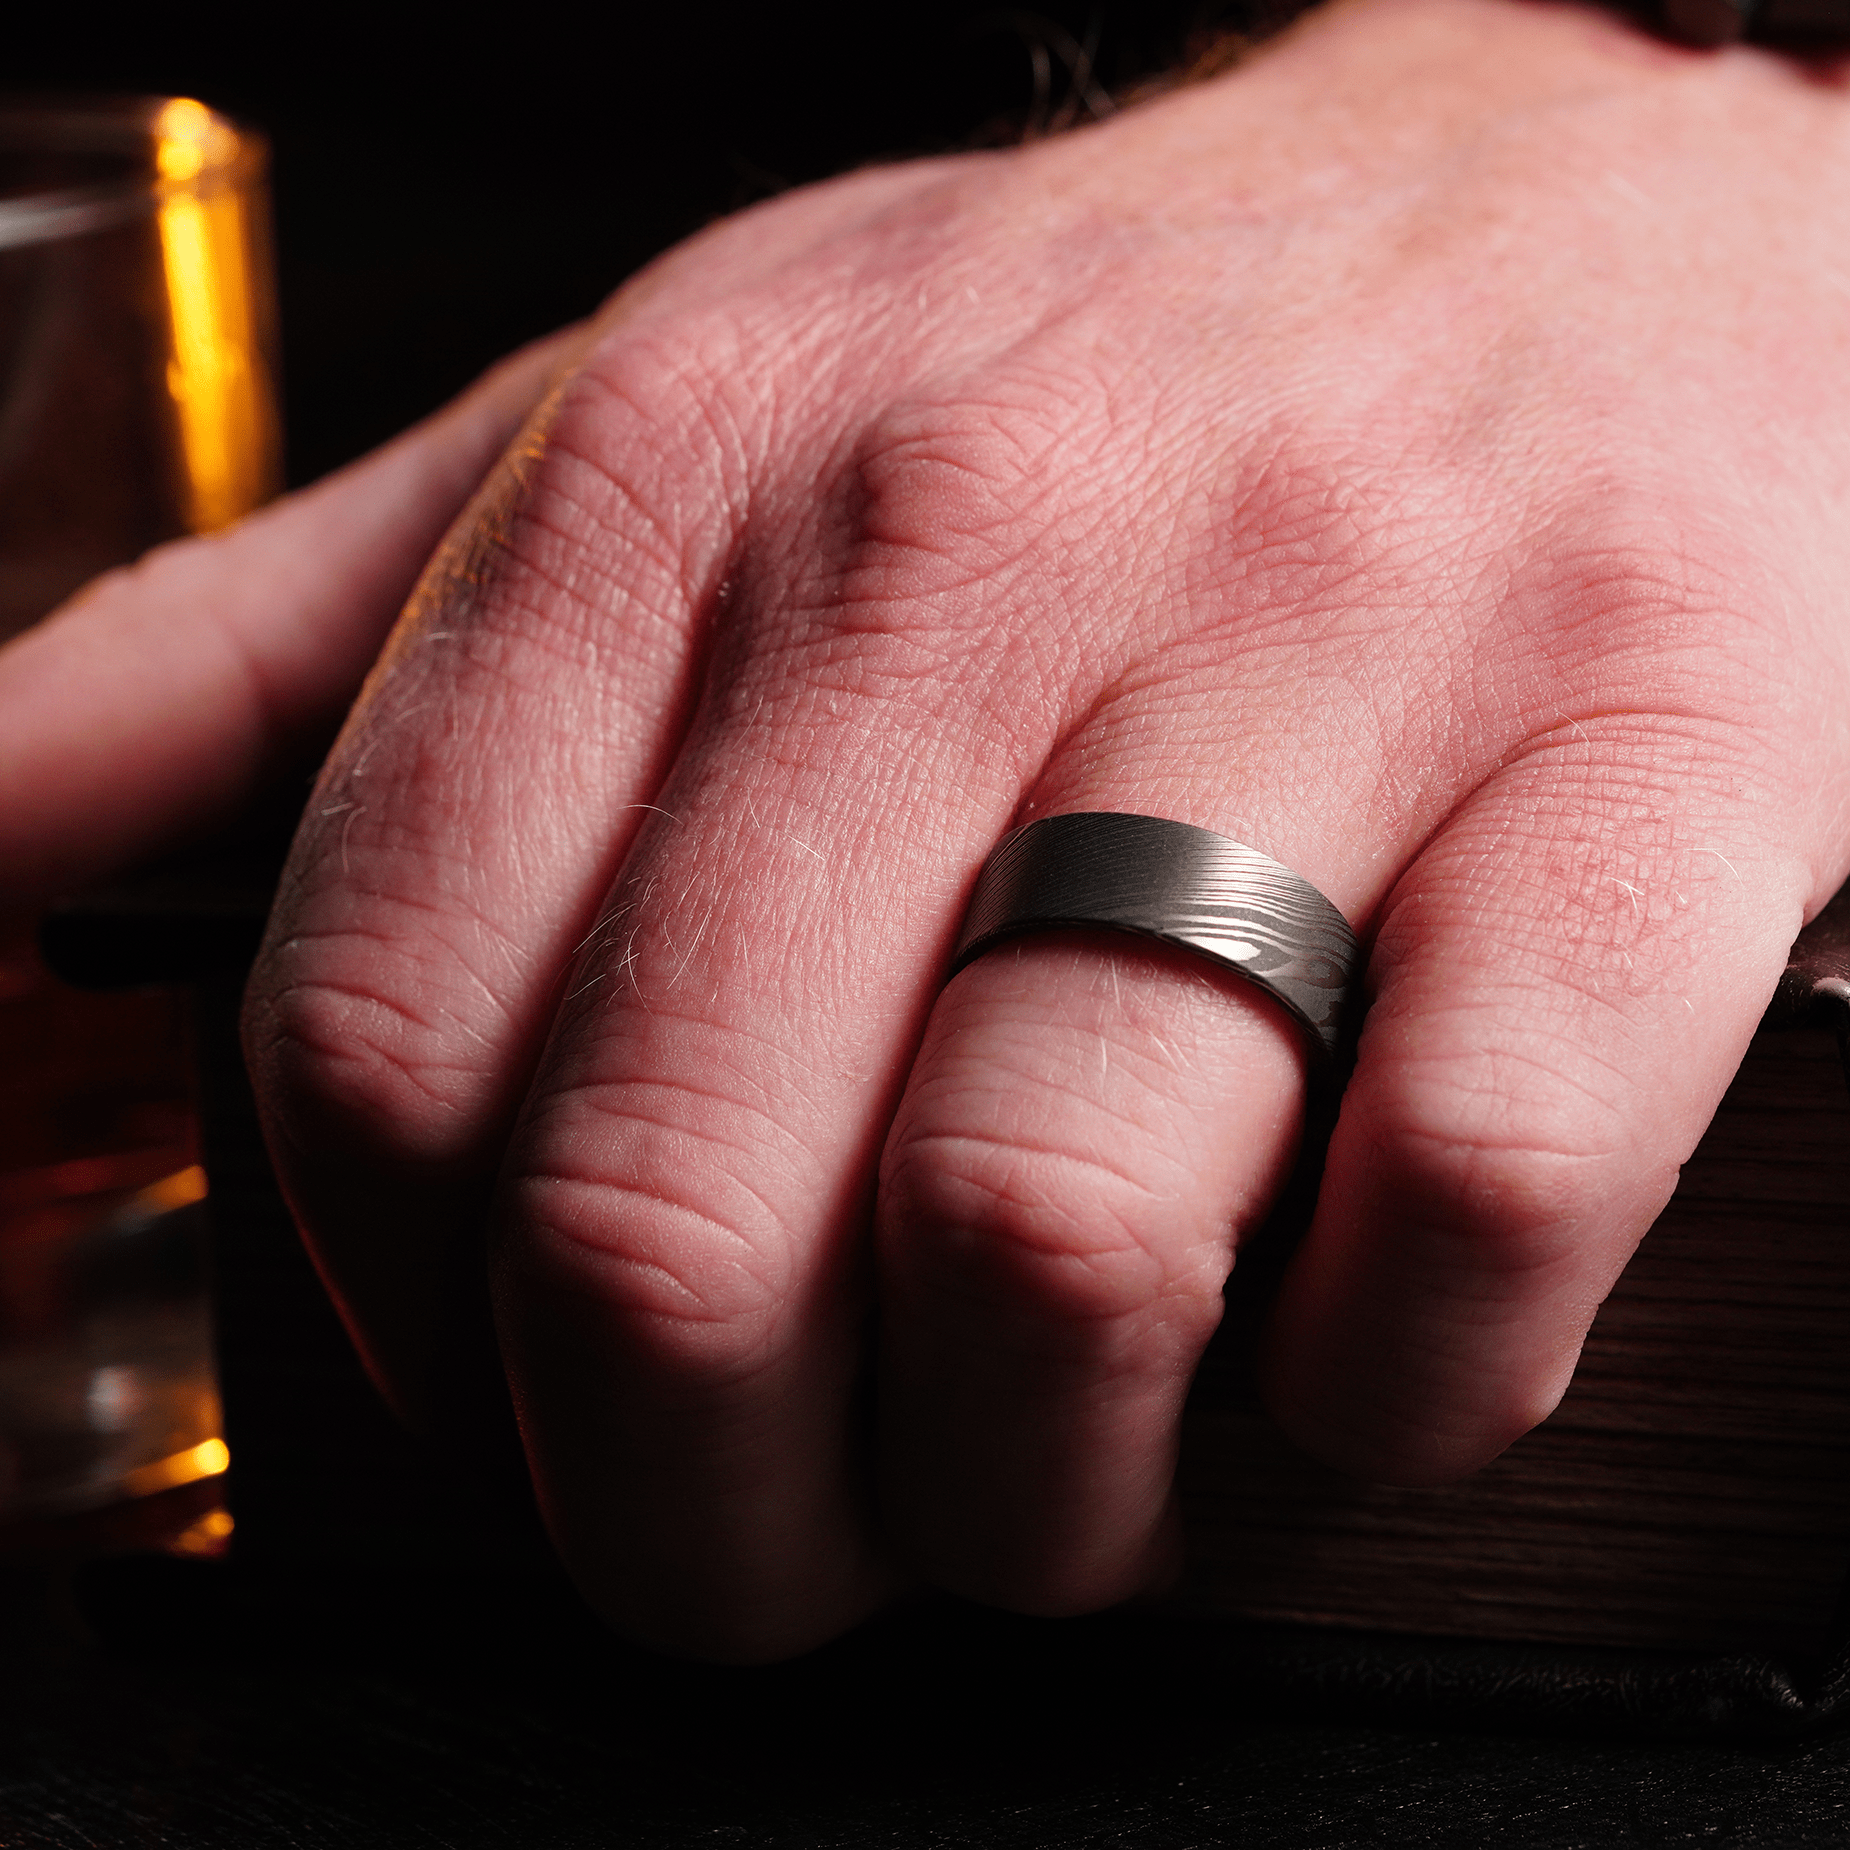 The Taylor - Men's Wedding Rings - Manly Bands